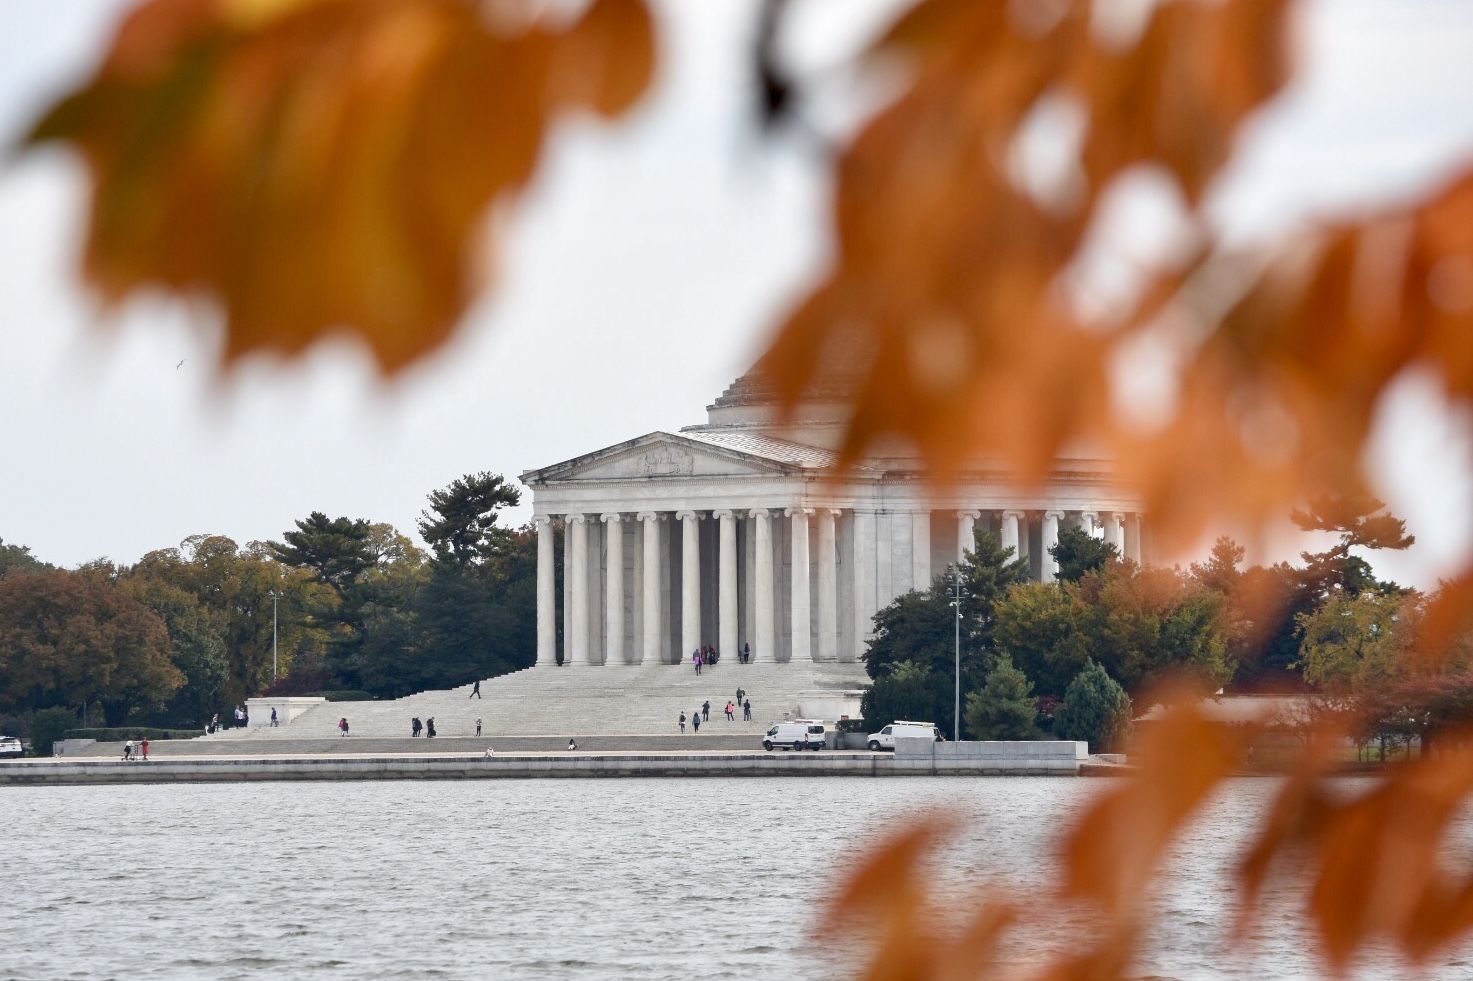 The Tidal Basin is a beautiful place to see and experience the fall foliage. (WTOP/Dave Dildine)